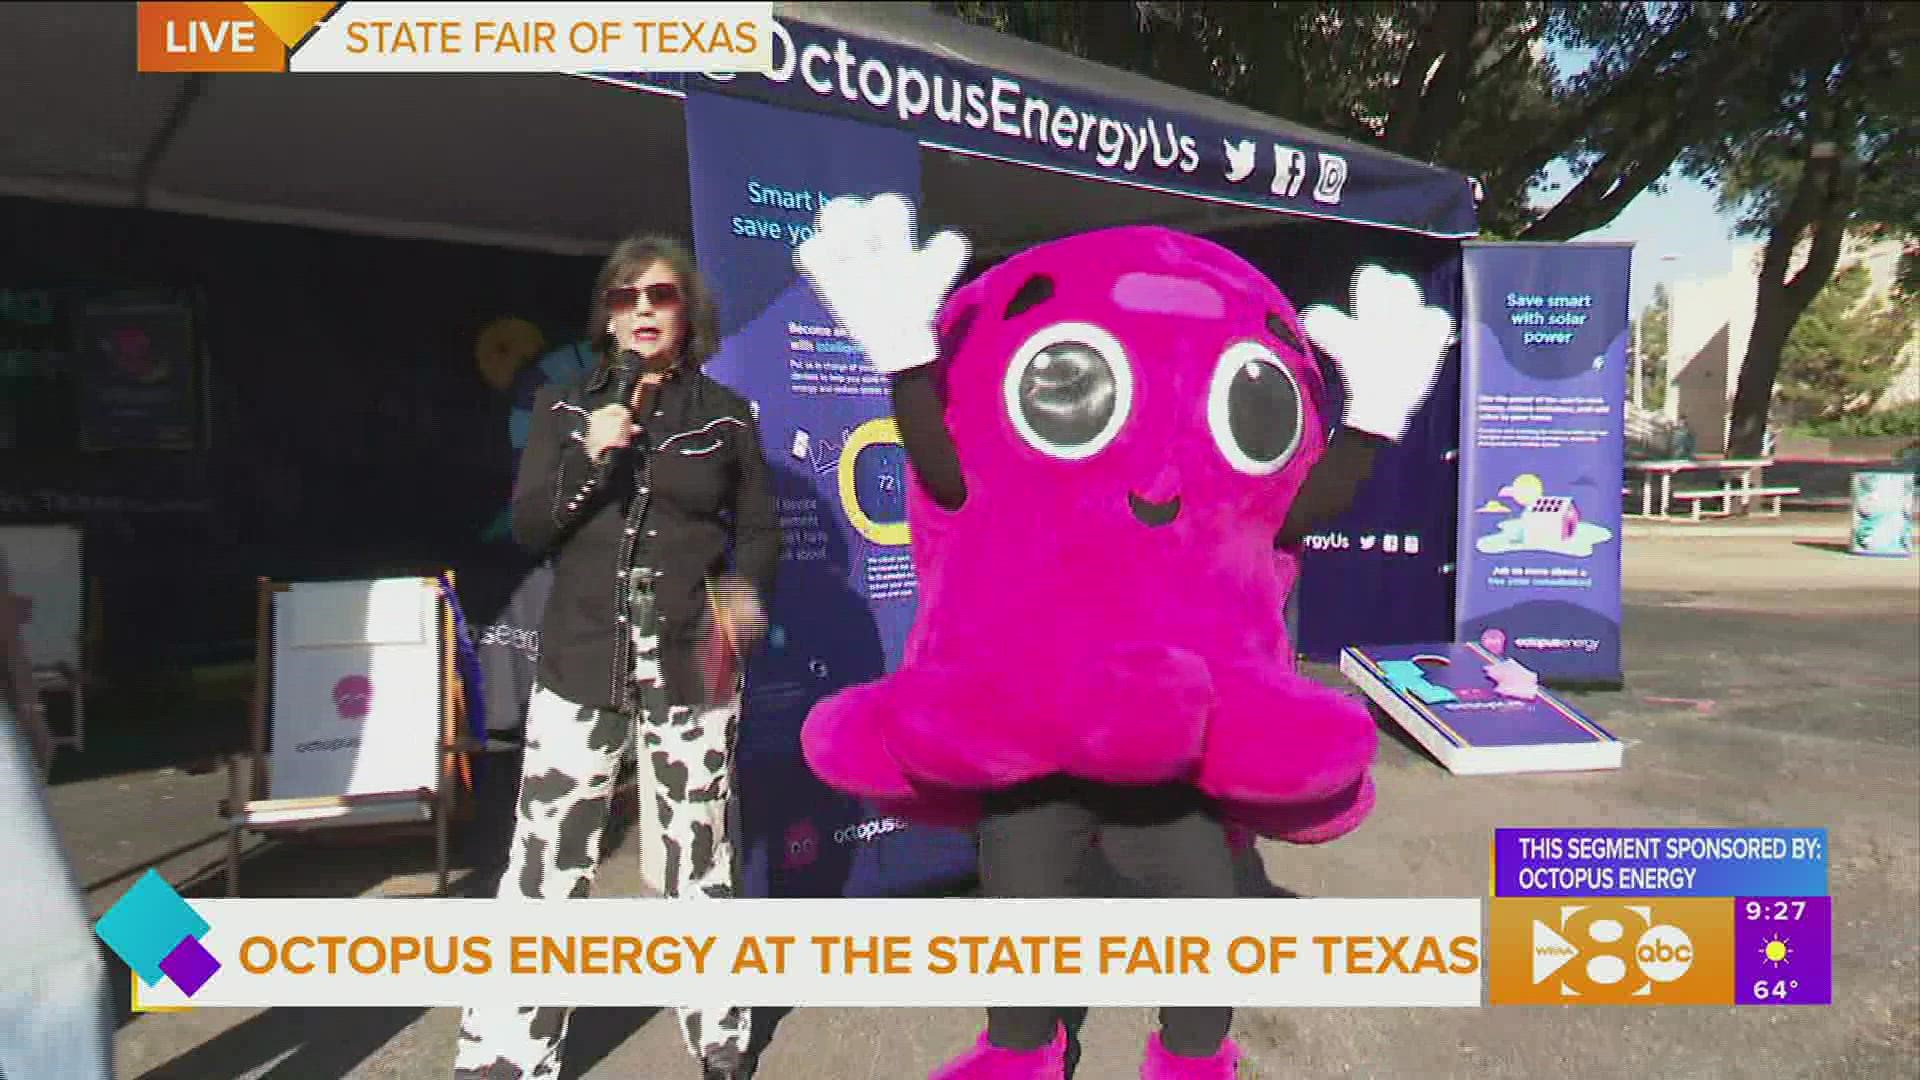 This segment is sponsored by Octopus Energy.